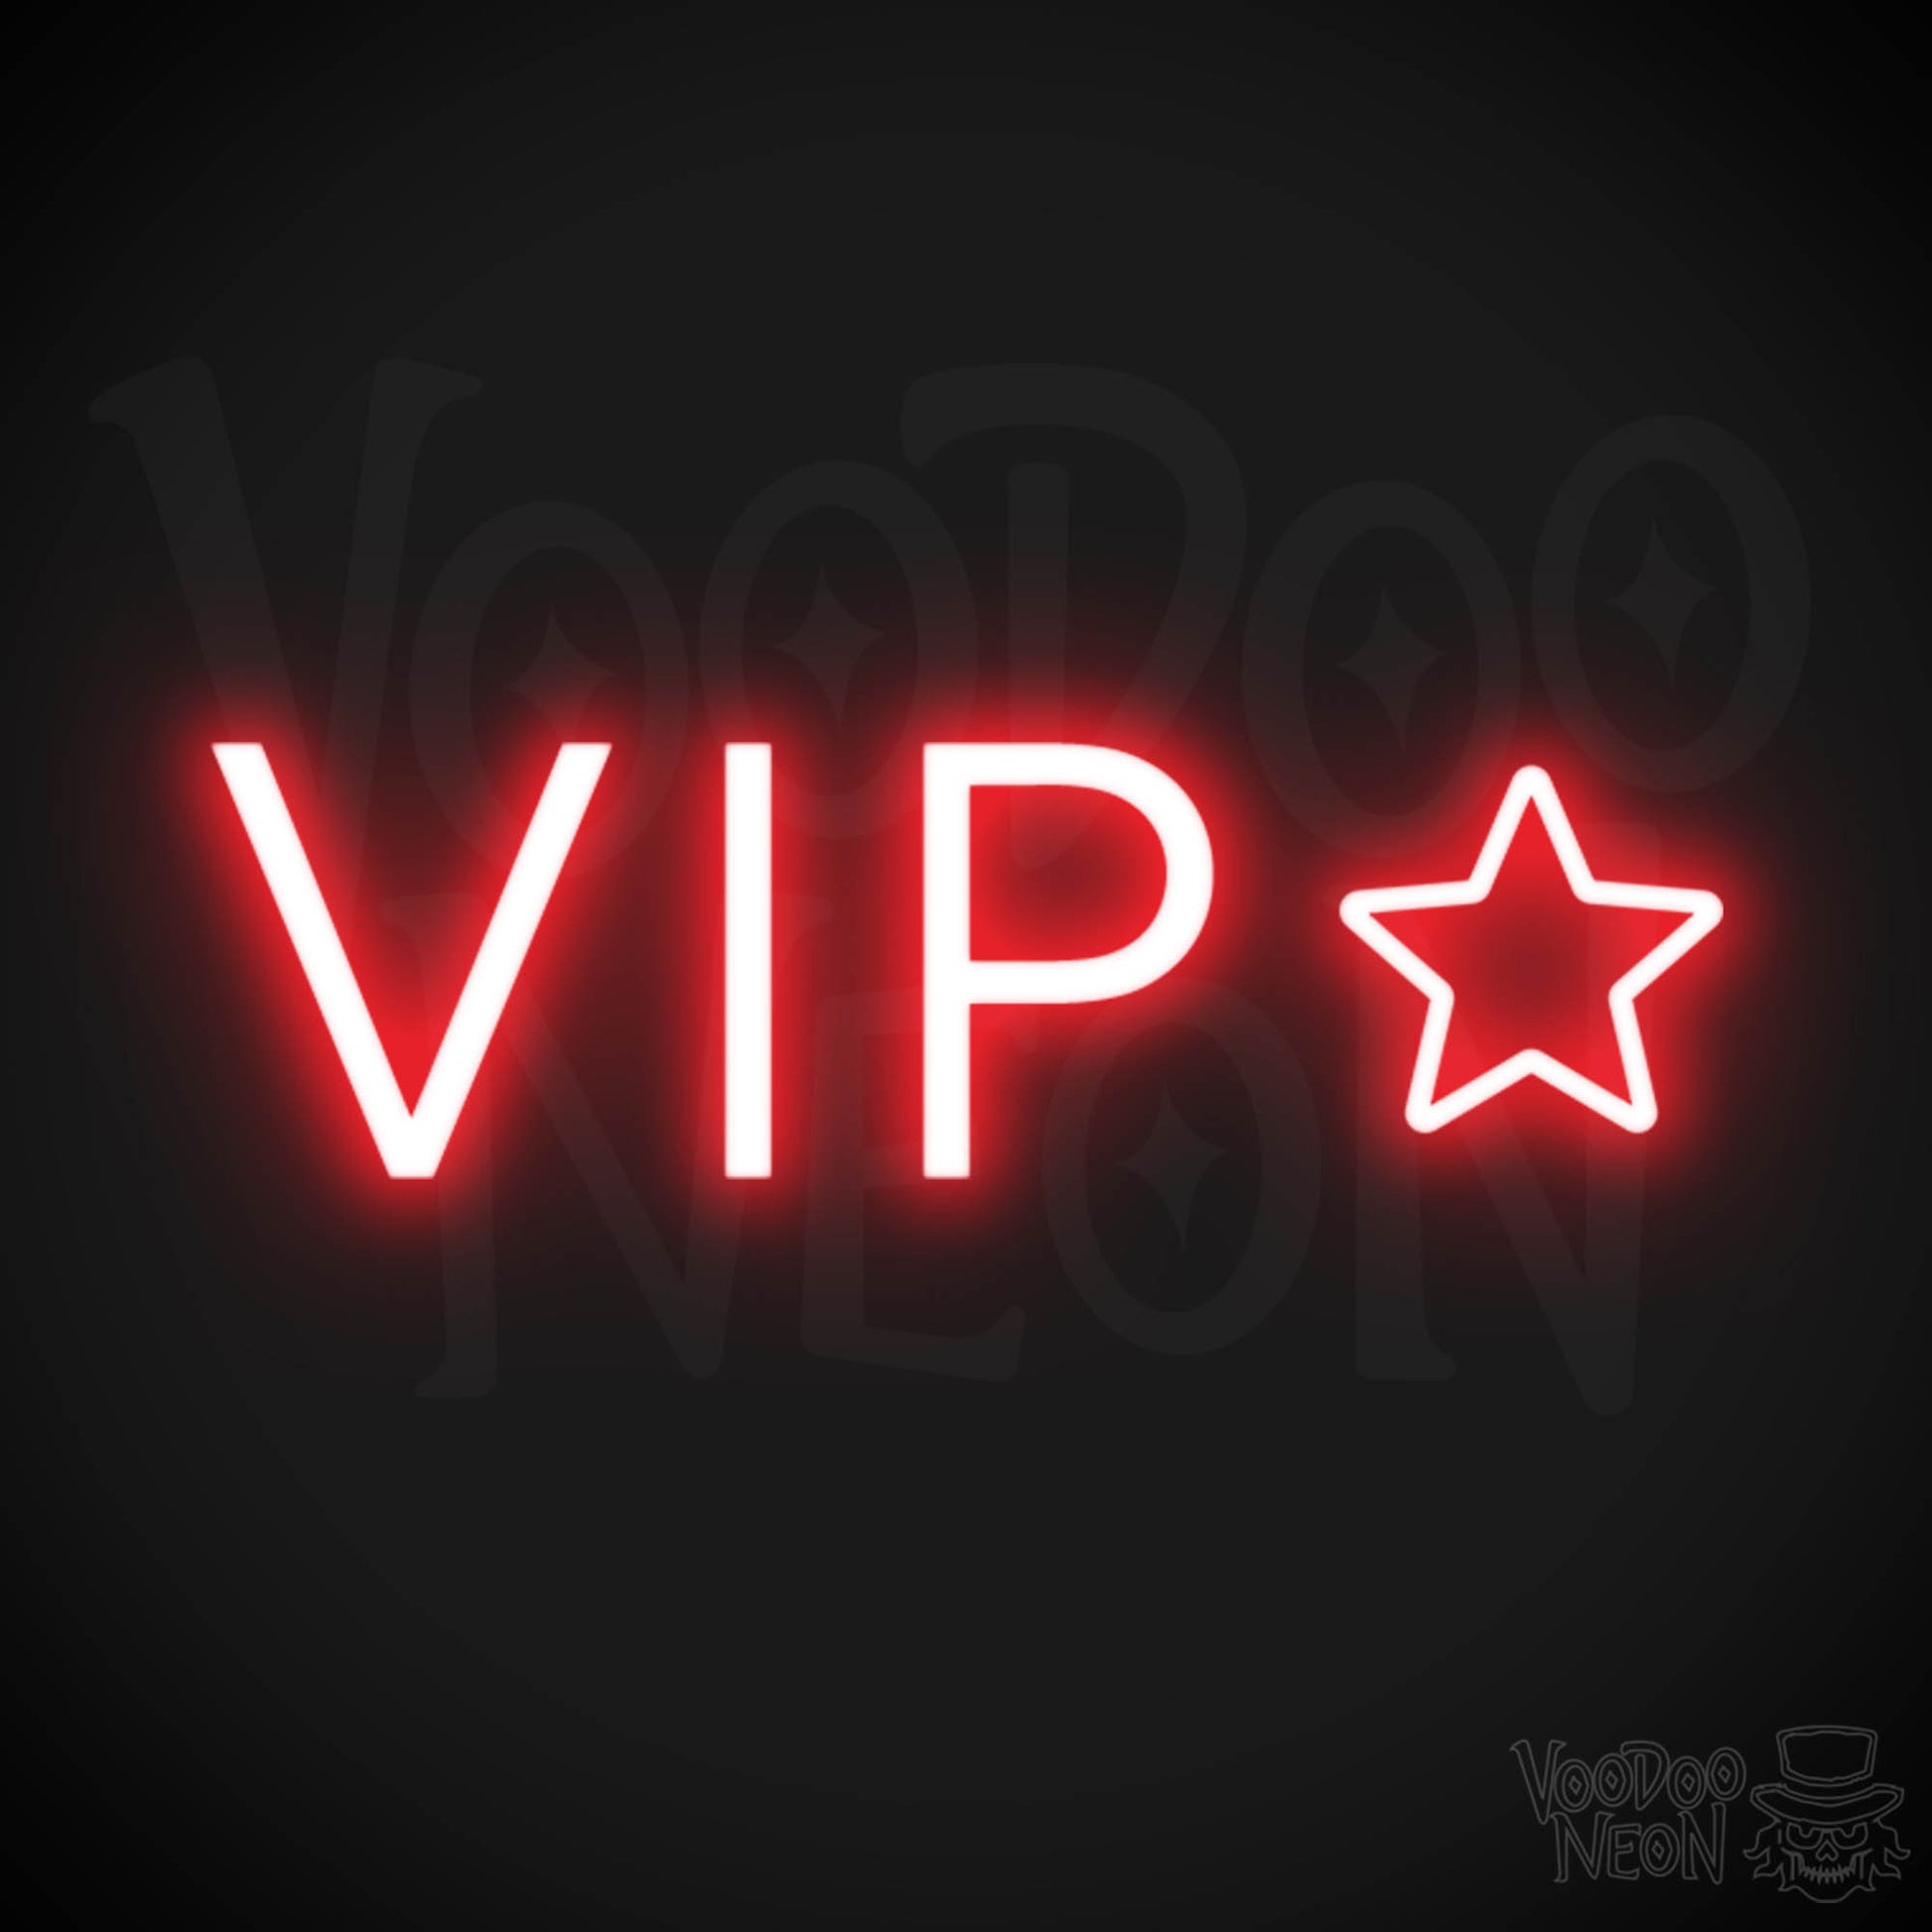 VIP Neon Sign - Neon VIP Sign - VIP LED Sign - Color Red